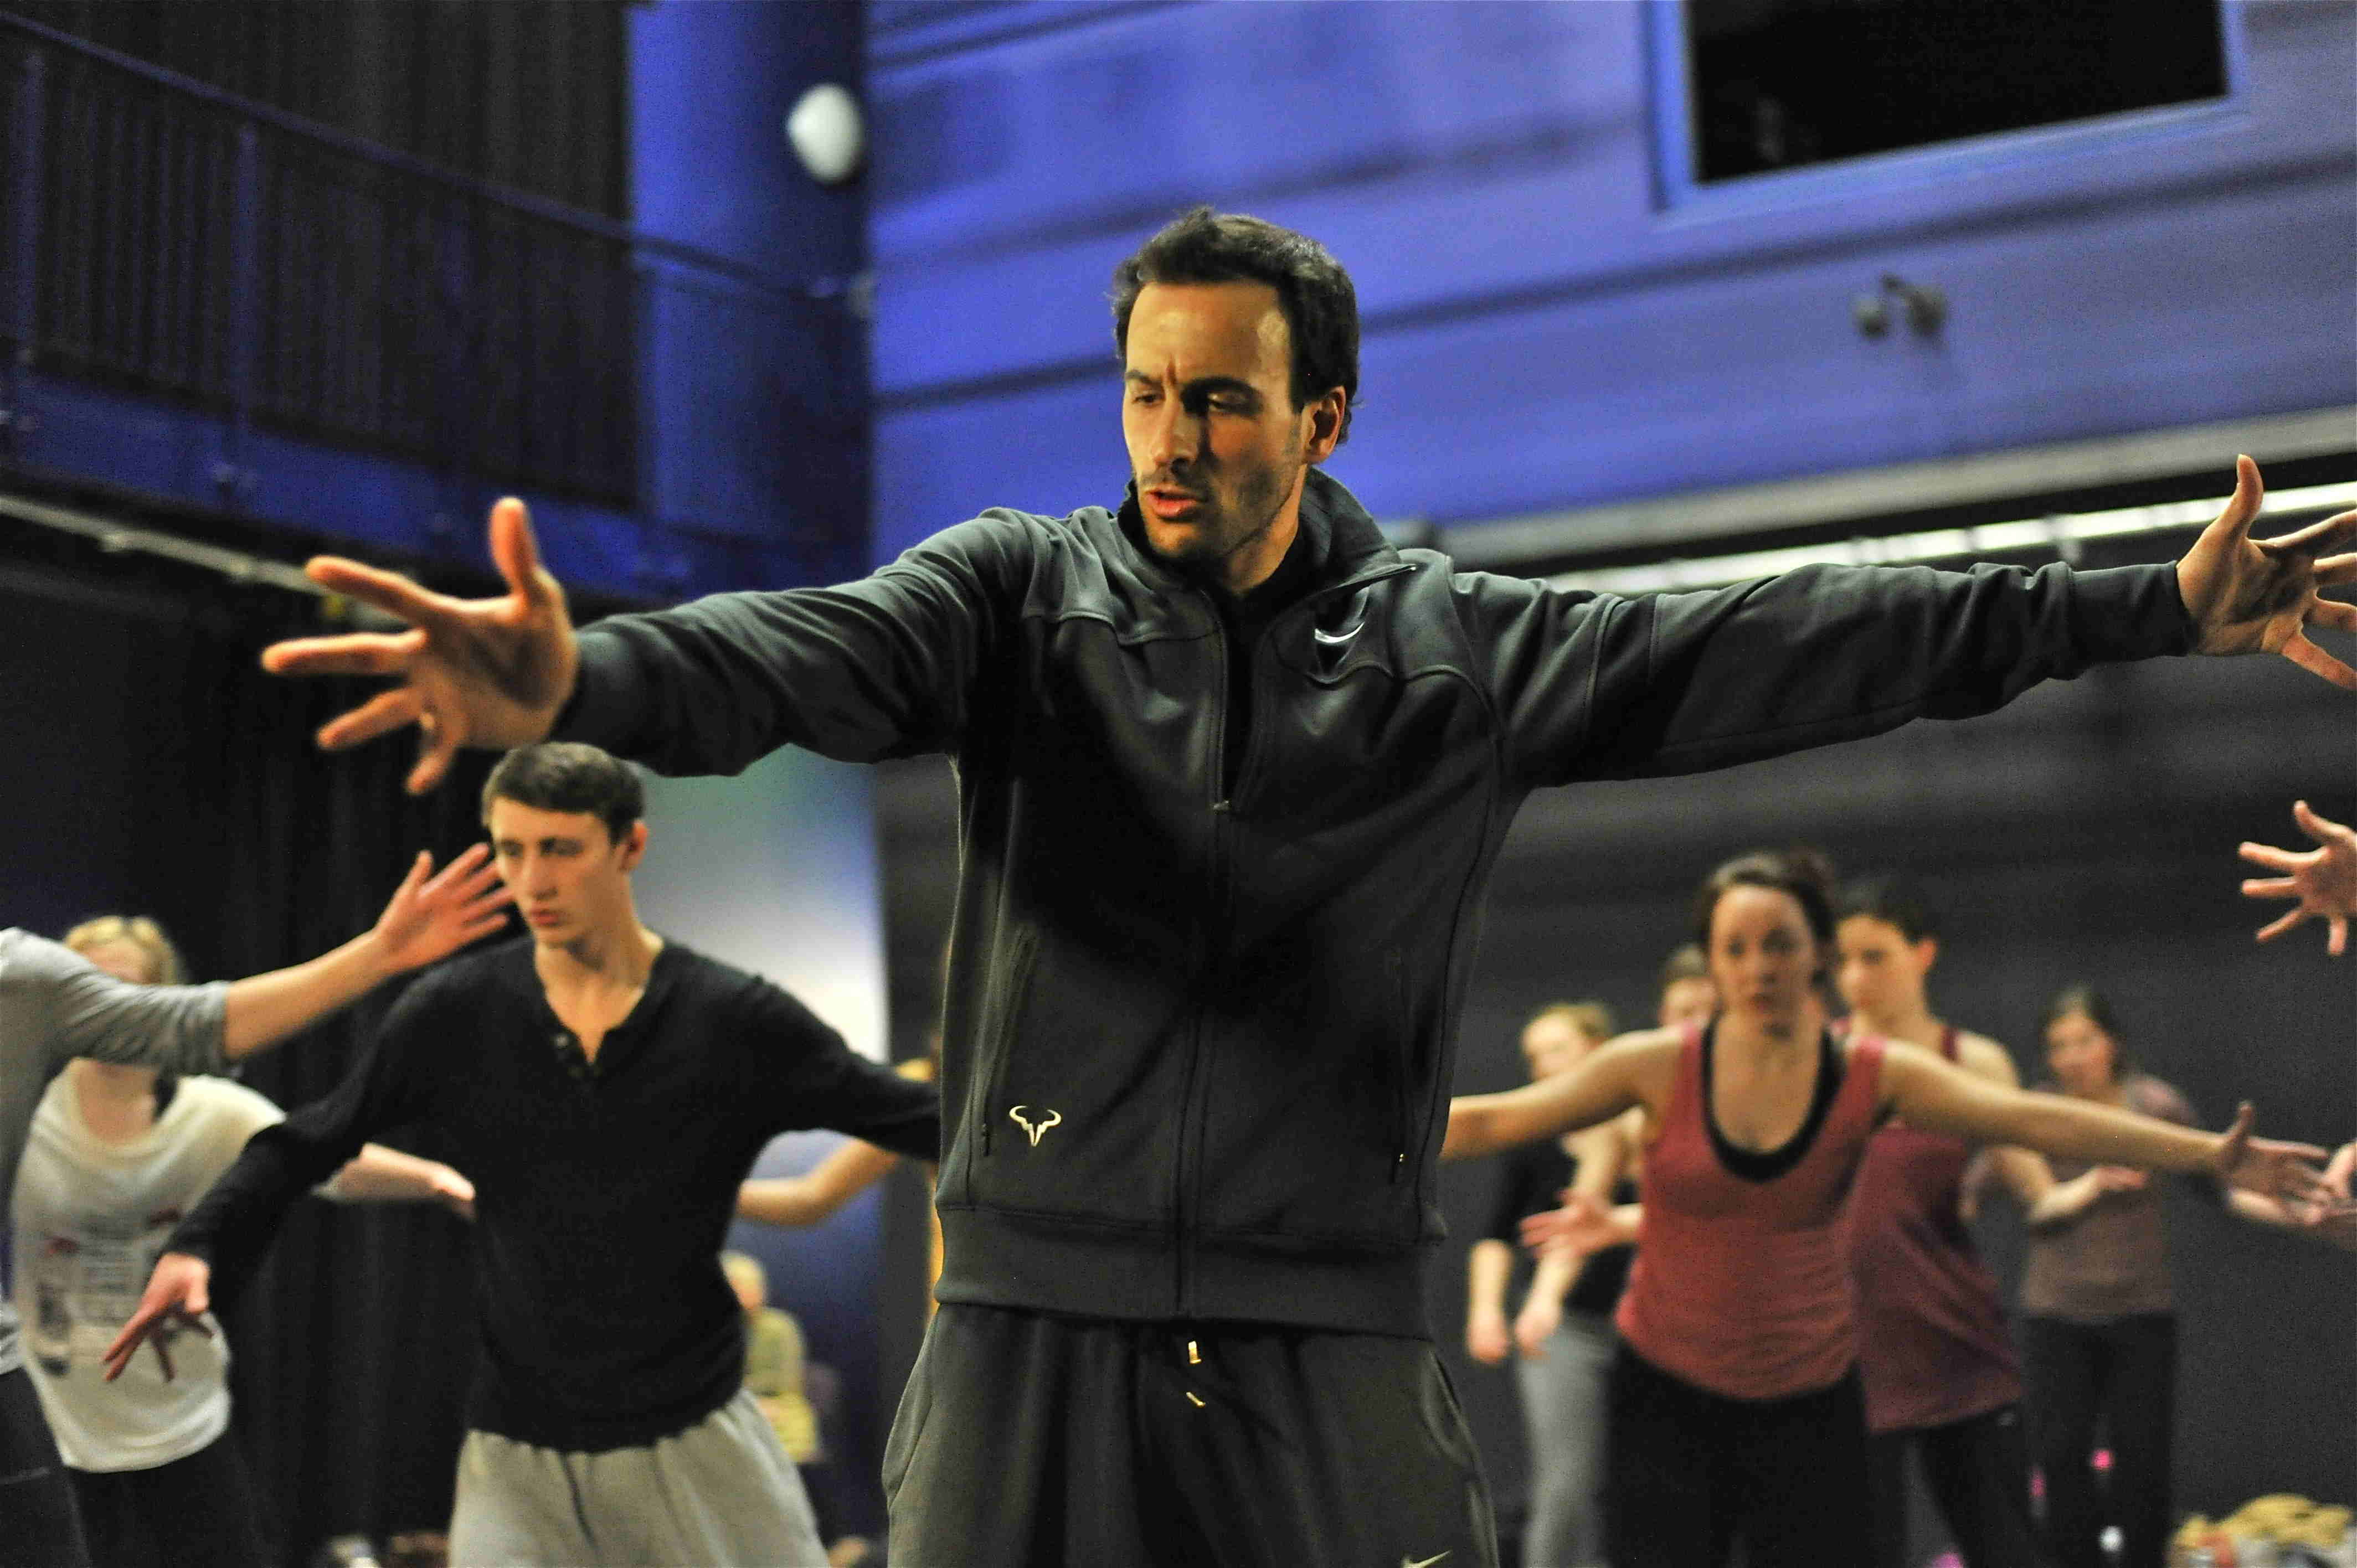 Hofesh Shechter does dance outreach work with young people